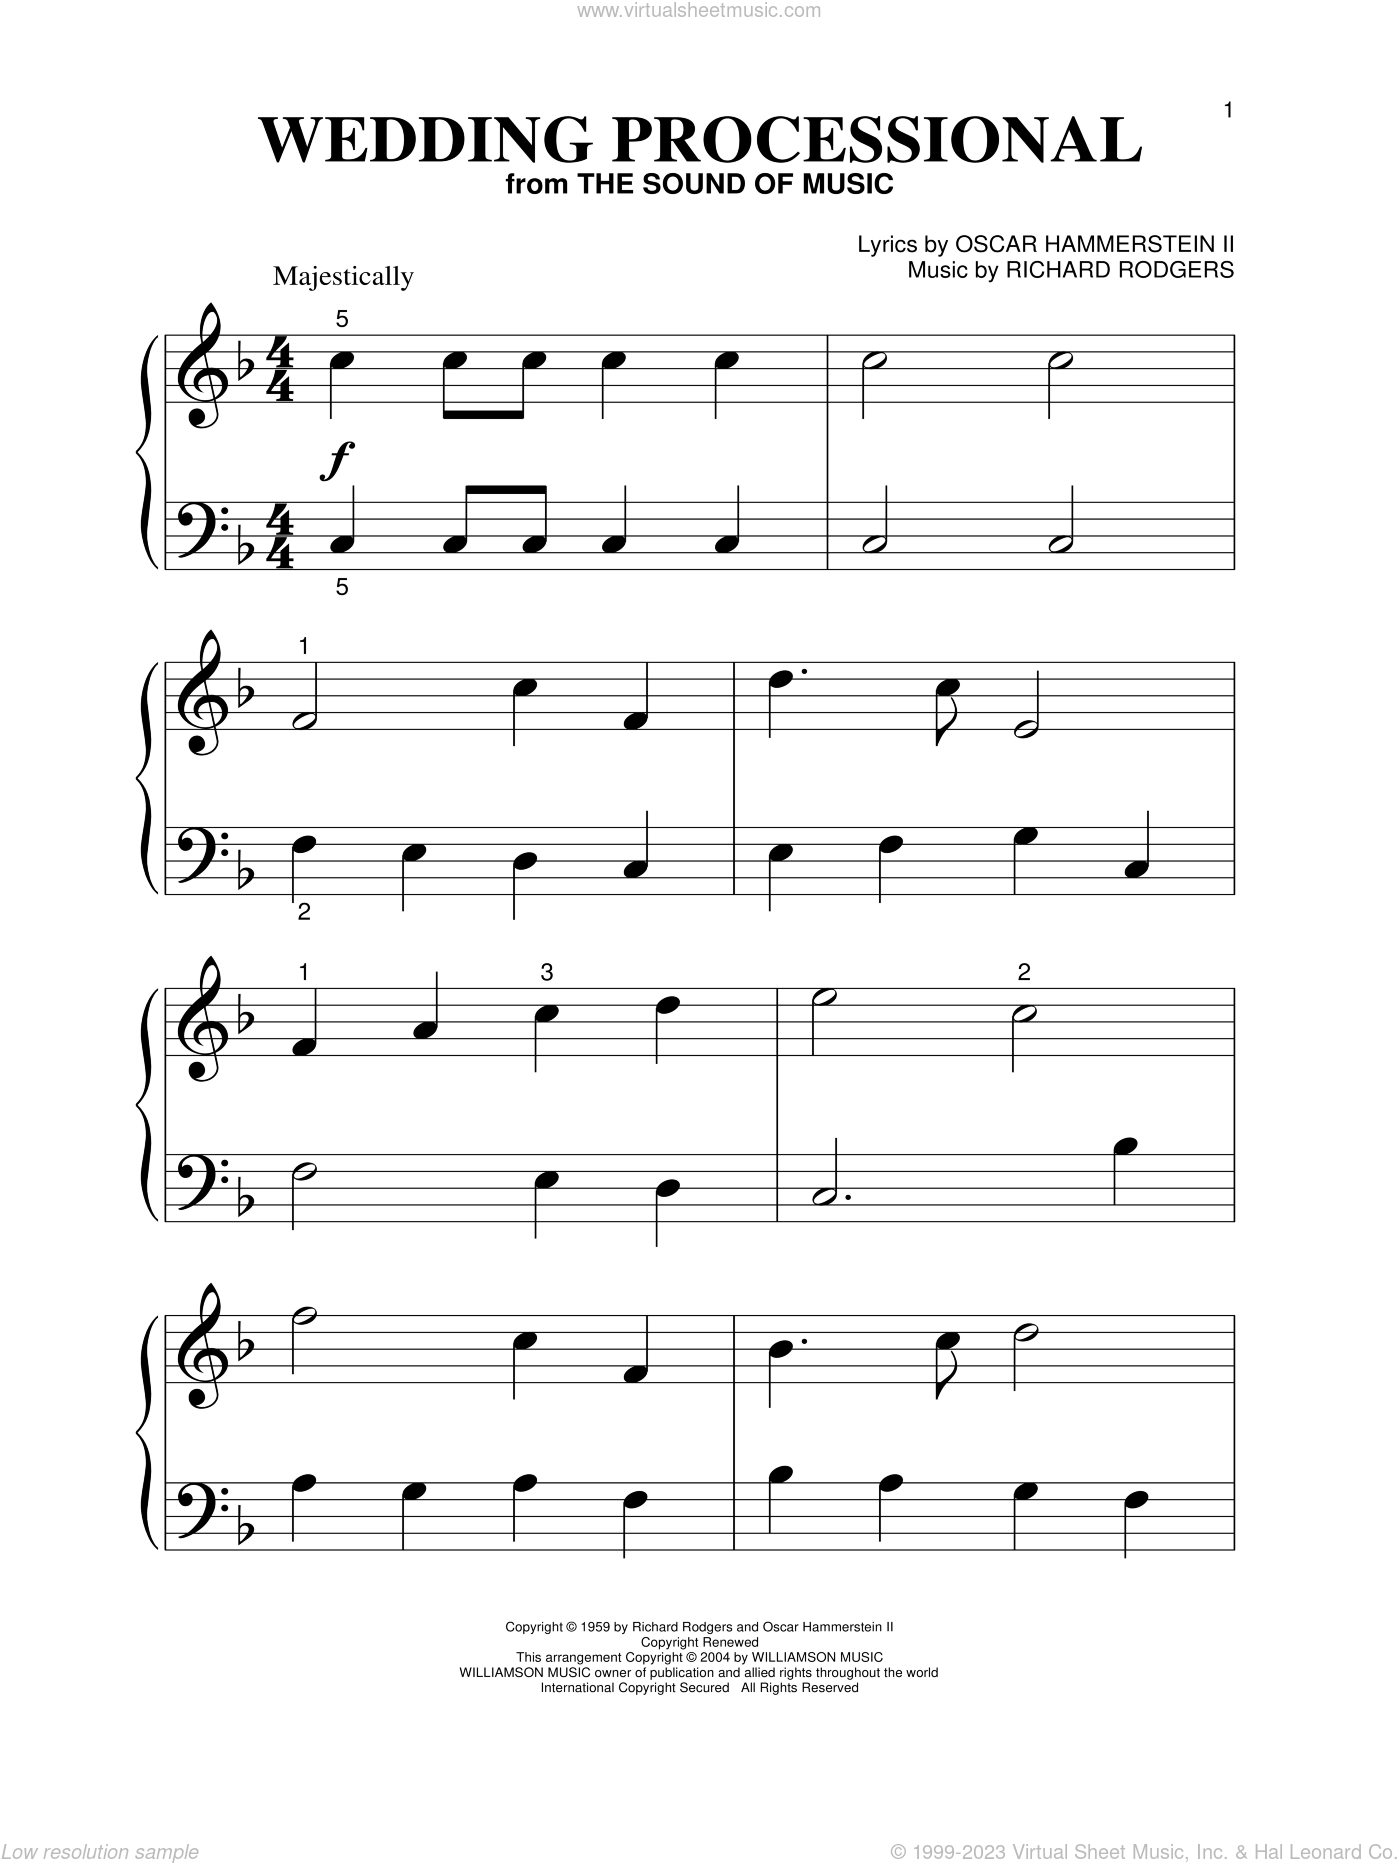 Hammerstein Wedding Processional sheet music for piano